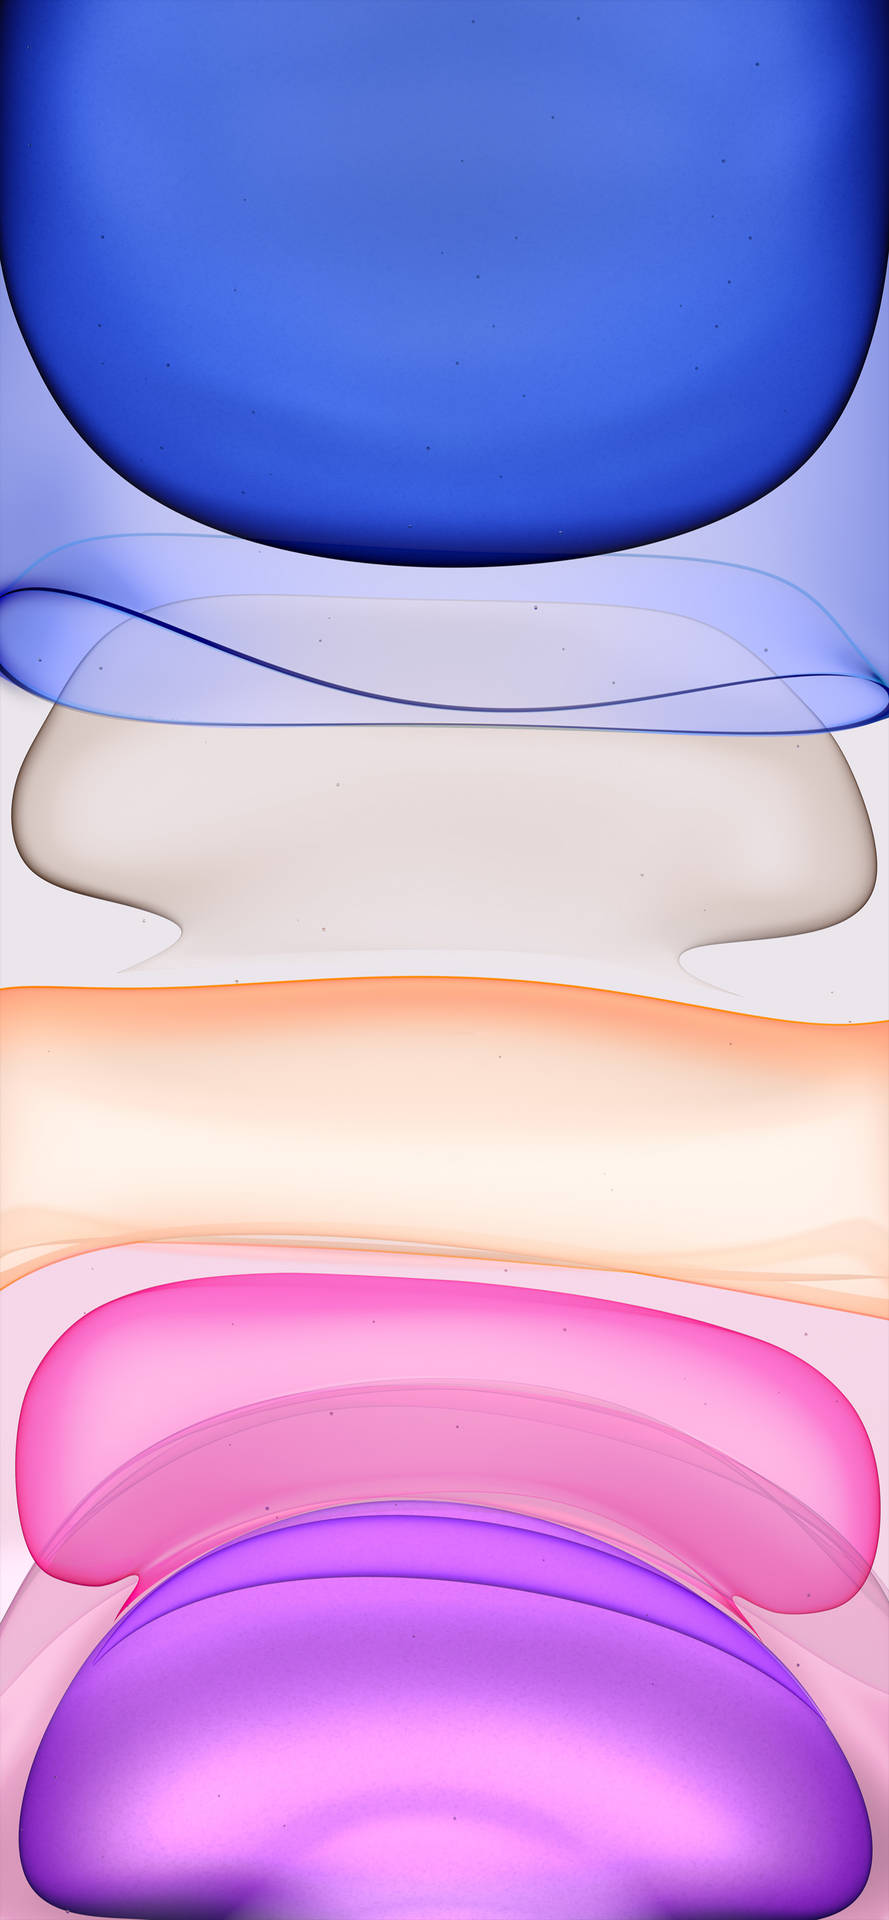 Brightly colored abstract pile of shapes for iPhone 11 Wallpaper